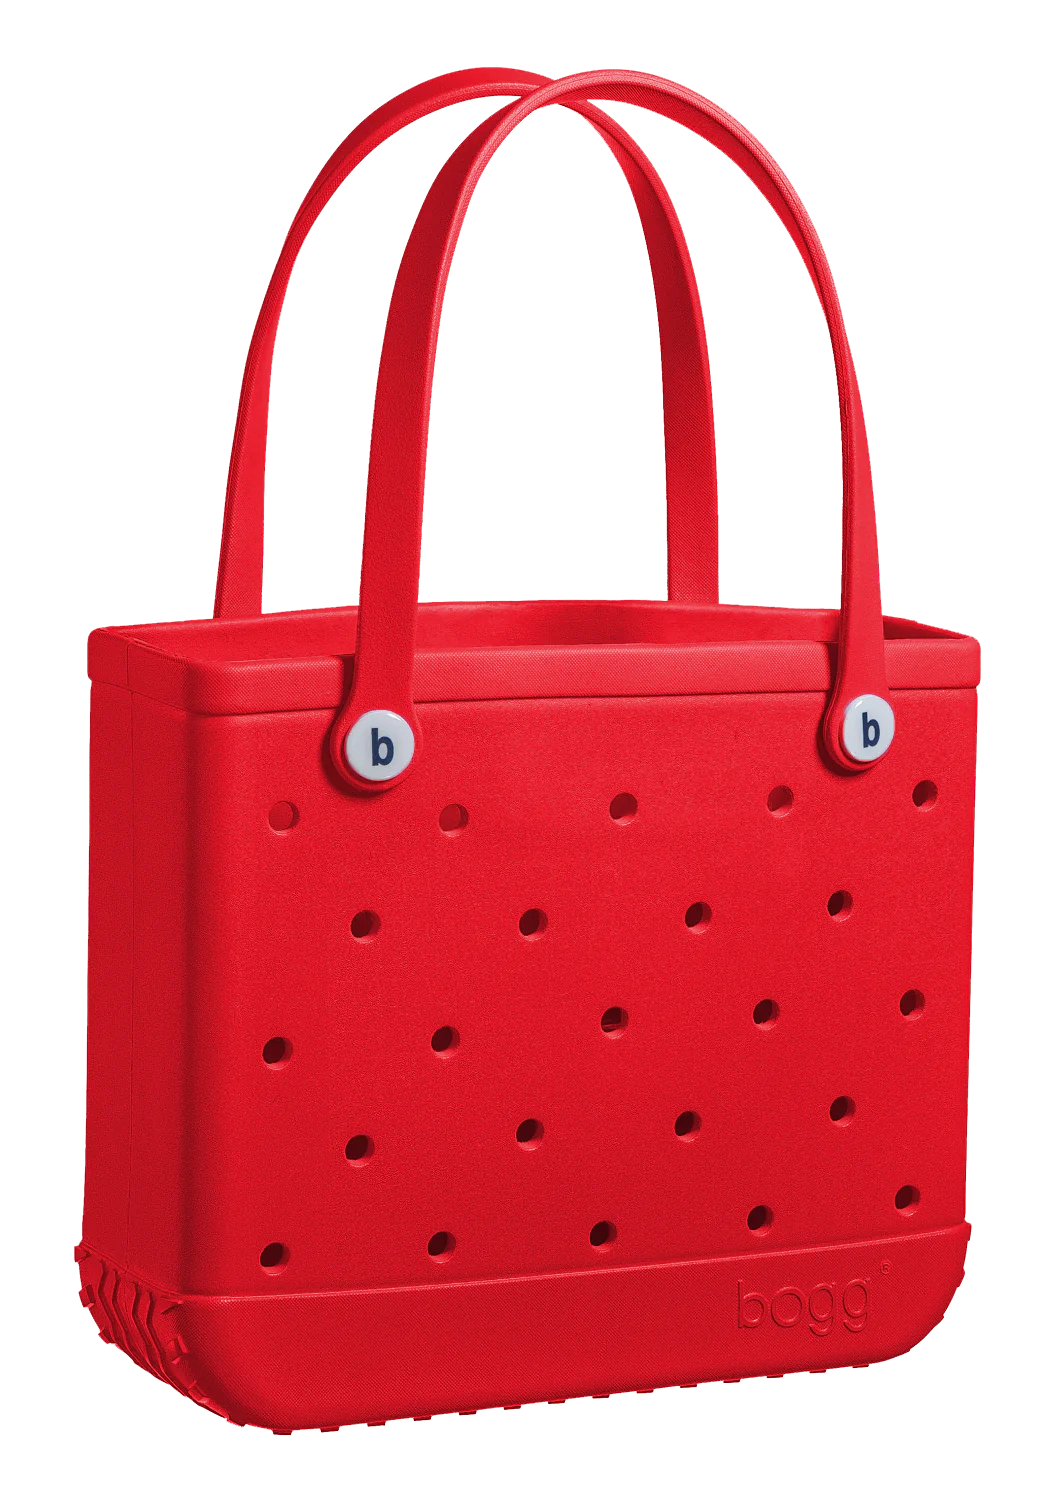 Bogg Bag Baby Bogg: Off to the Races, Red